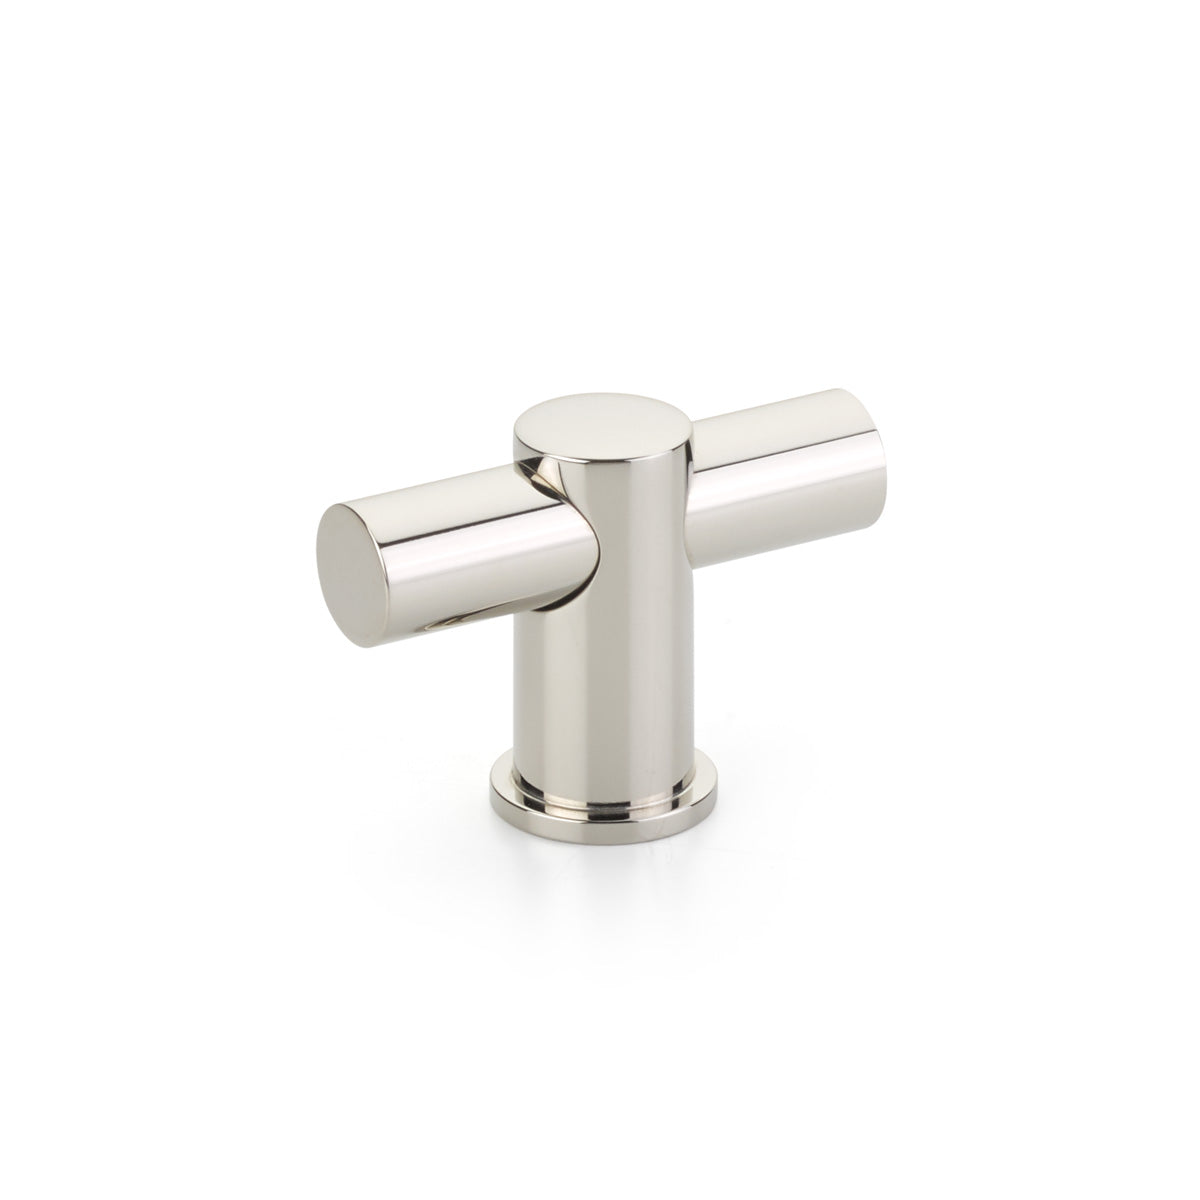 Polished Nickel "Fonce" Round T-Bar Cabinet Knobs and Drawer Pulls - Brass Cabinet Hardware 